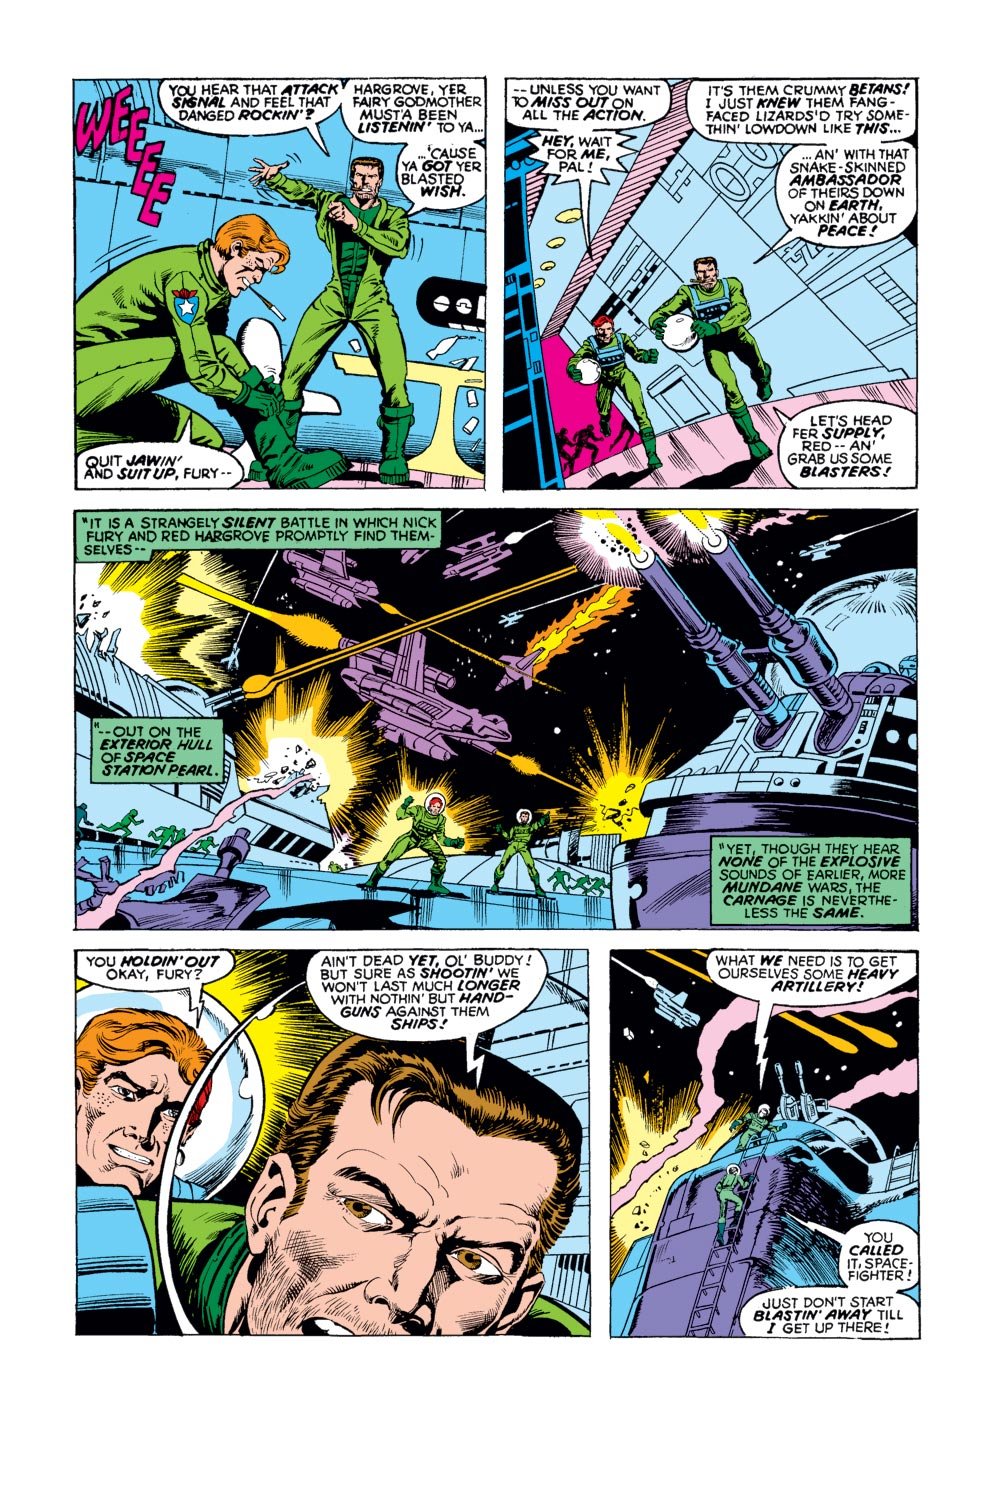 What If? (1977) issue 14 - Sgt. Fury had Fought WWII in Outer Space - Page 5